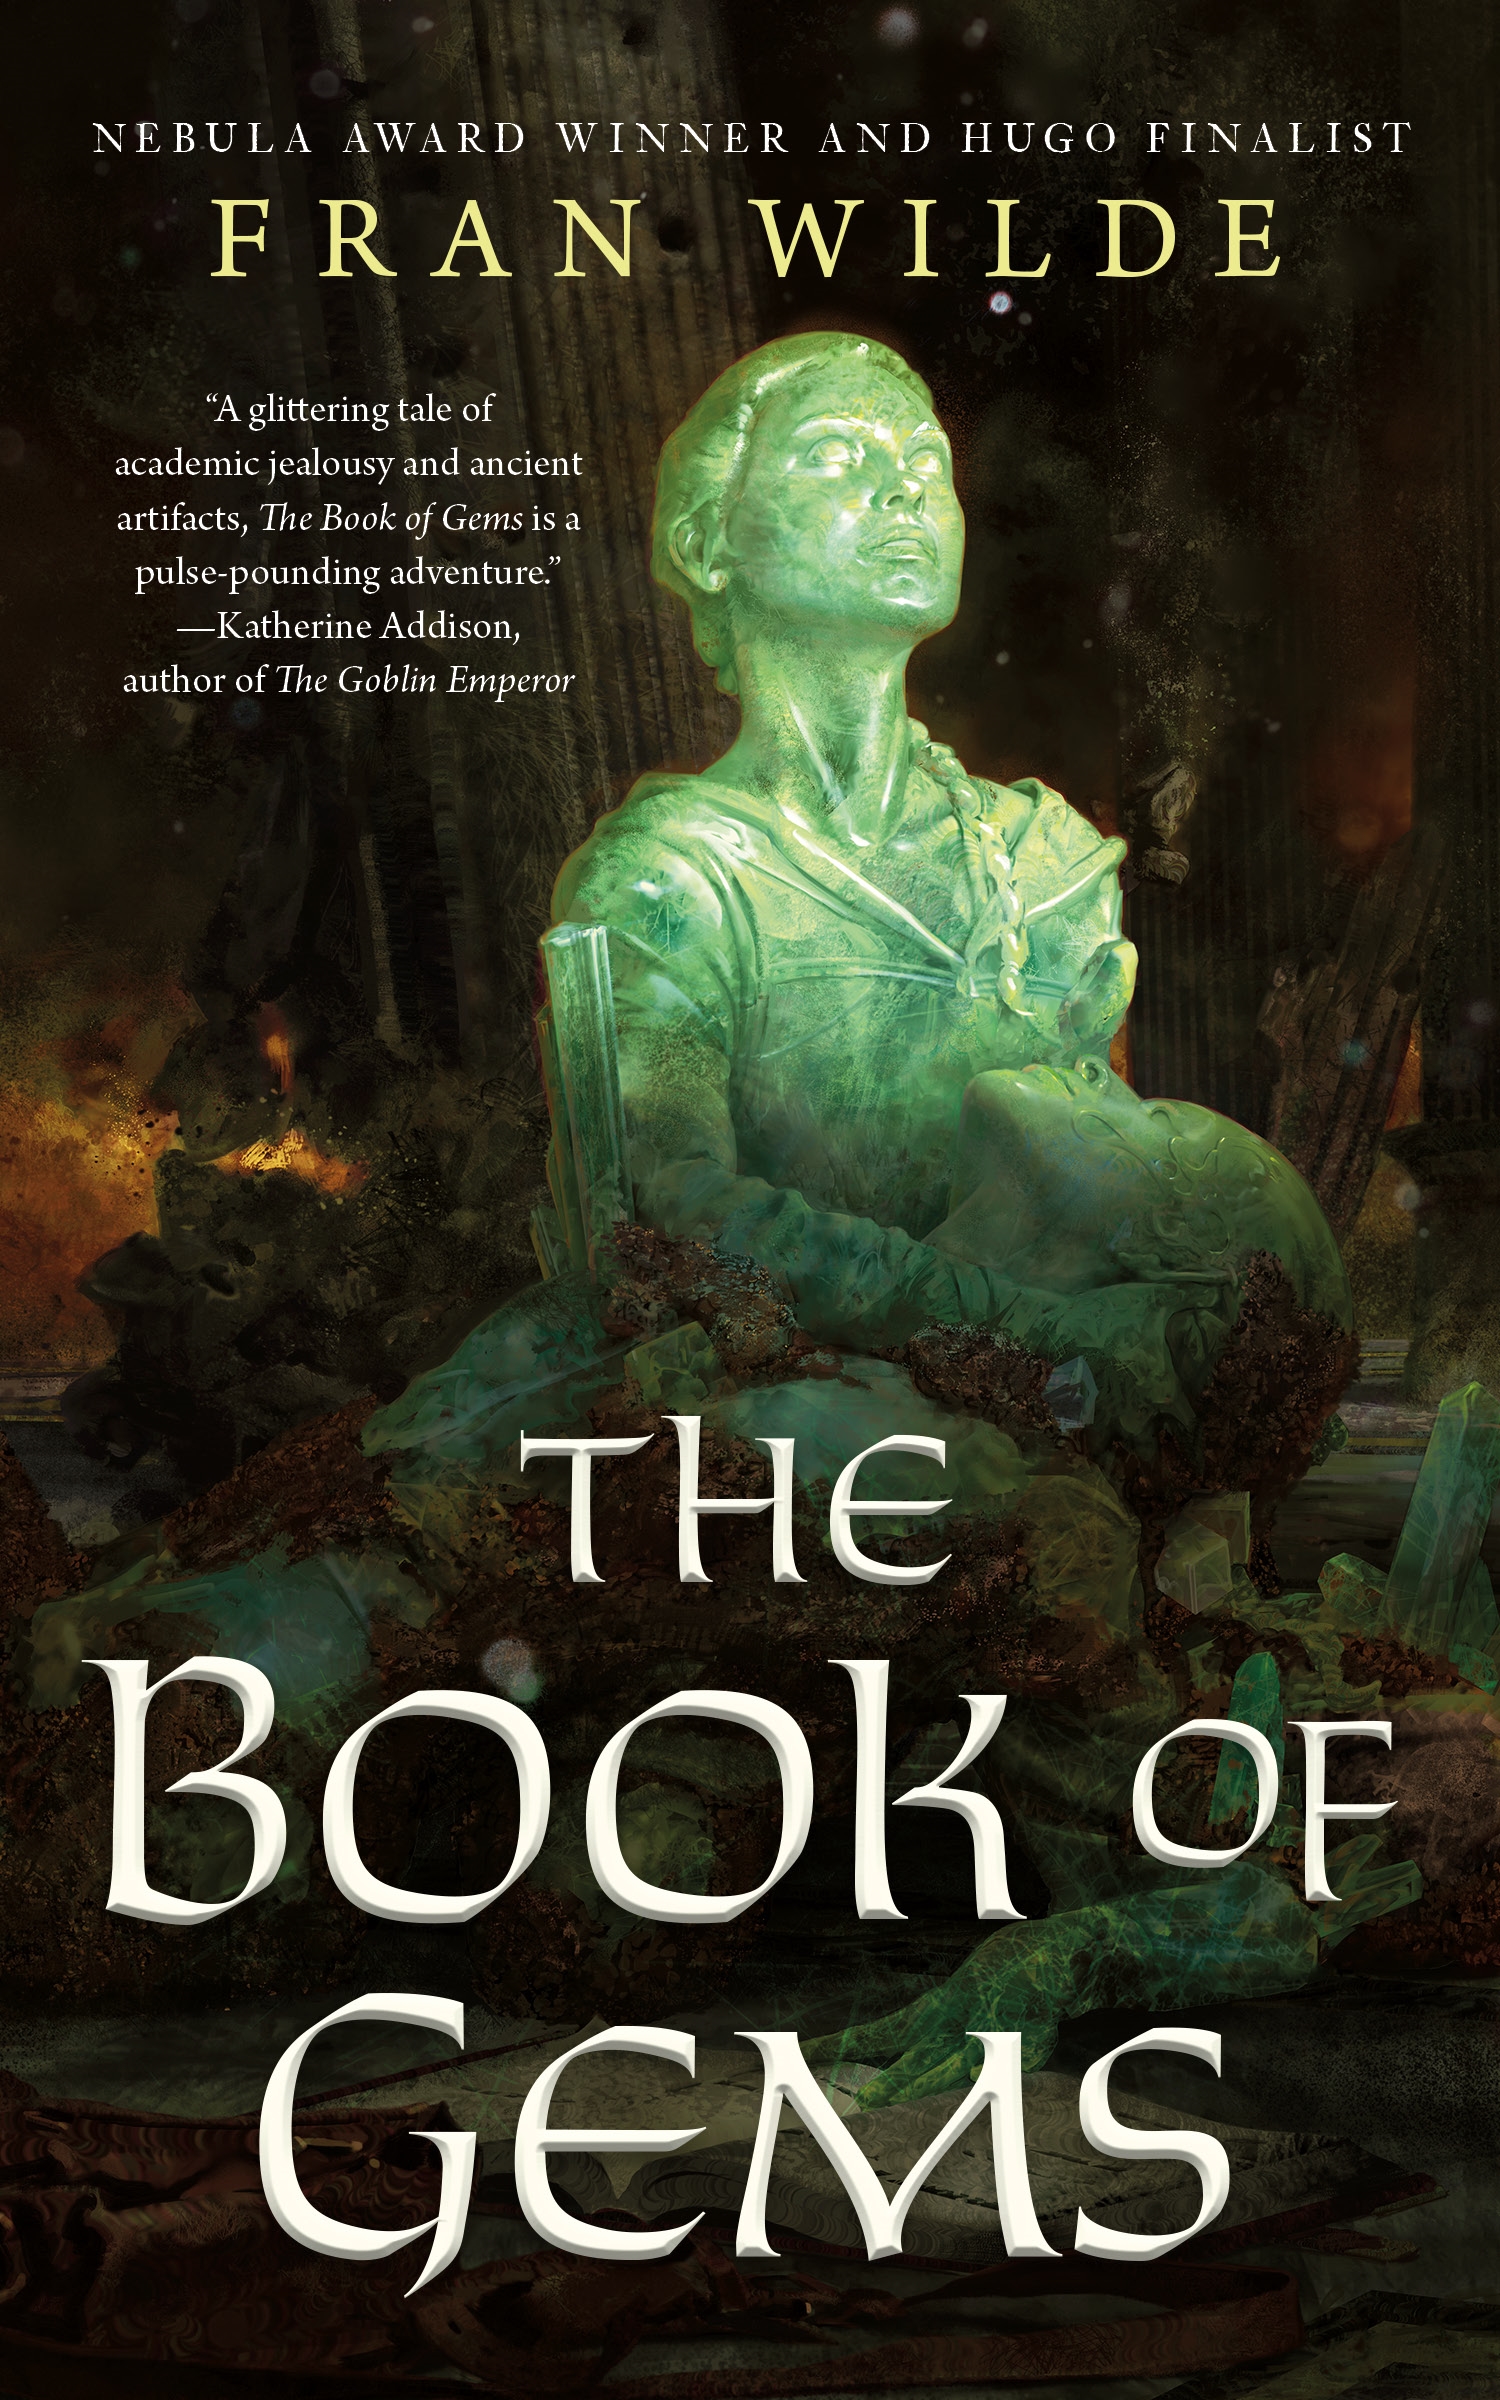 The Book of Gems by Fran Wilde